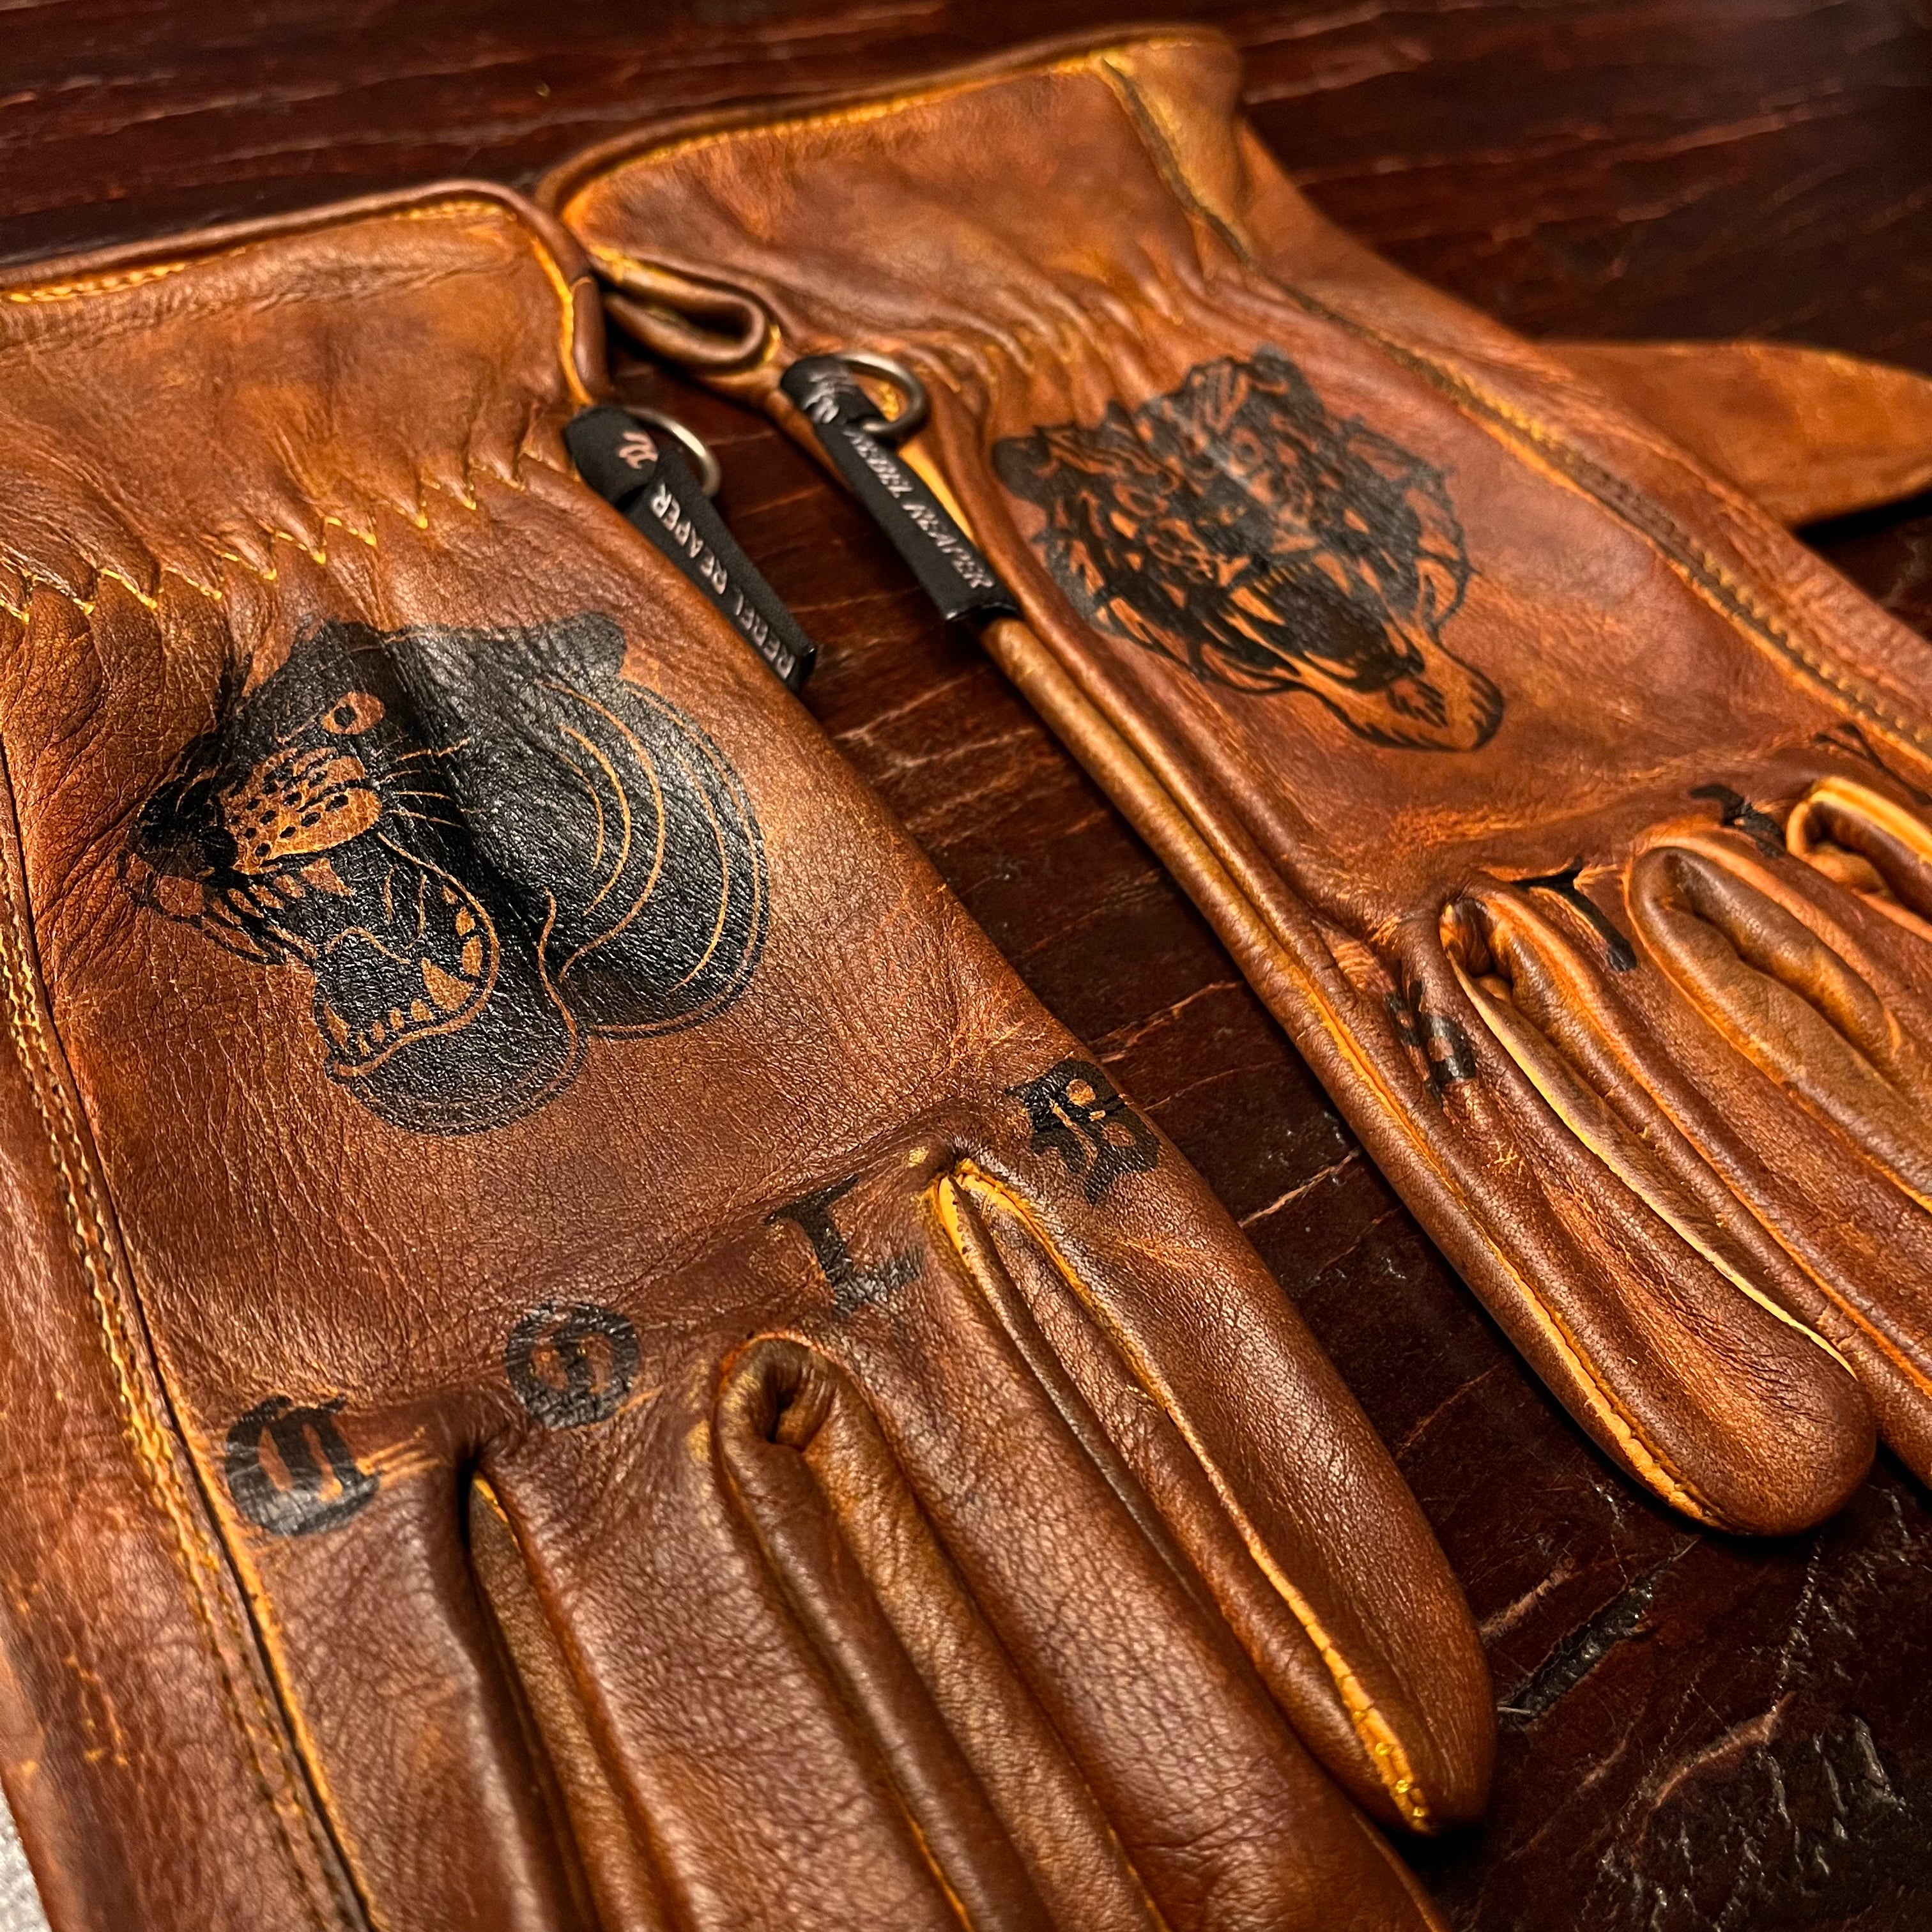 Roper Stay Cold Printed - Distressed Brown Leather Gloves - Rebel Reaper Clothing Company